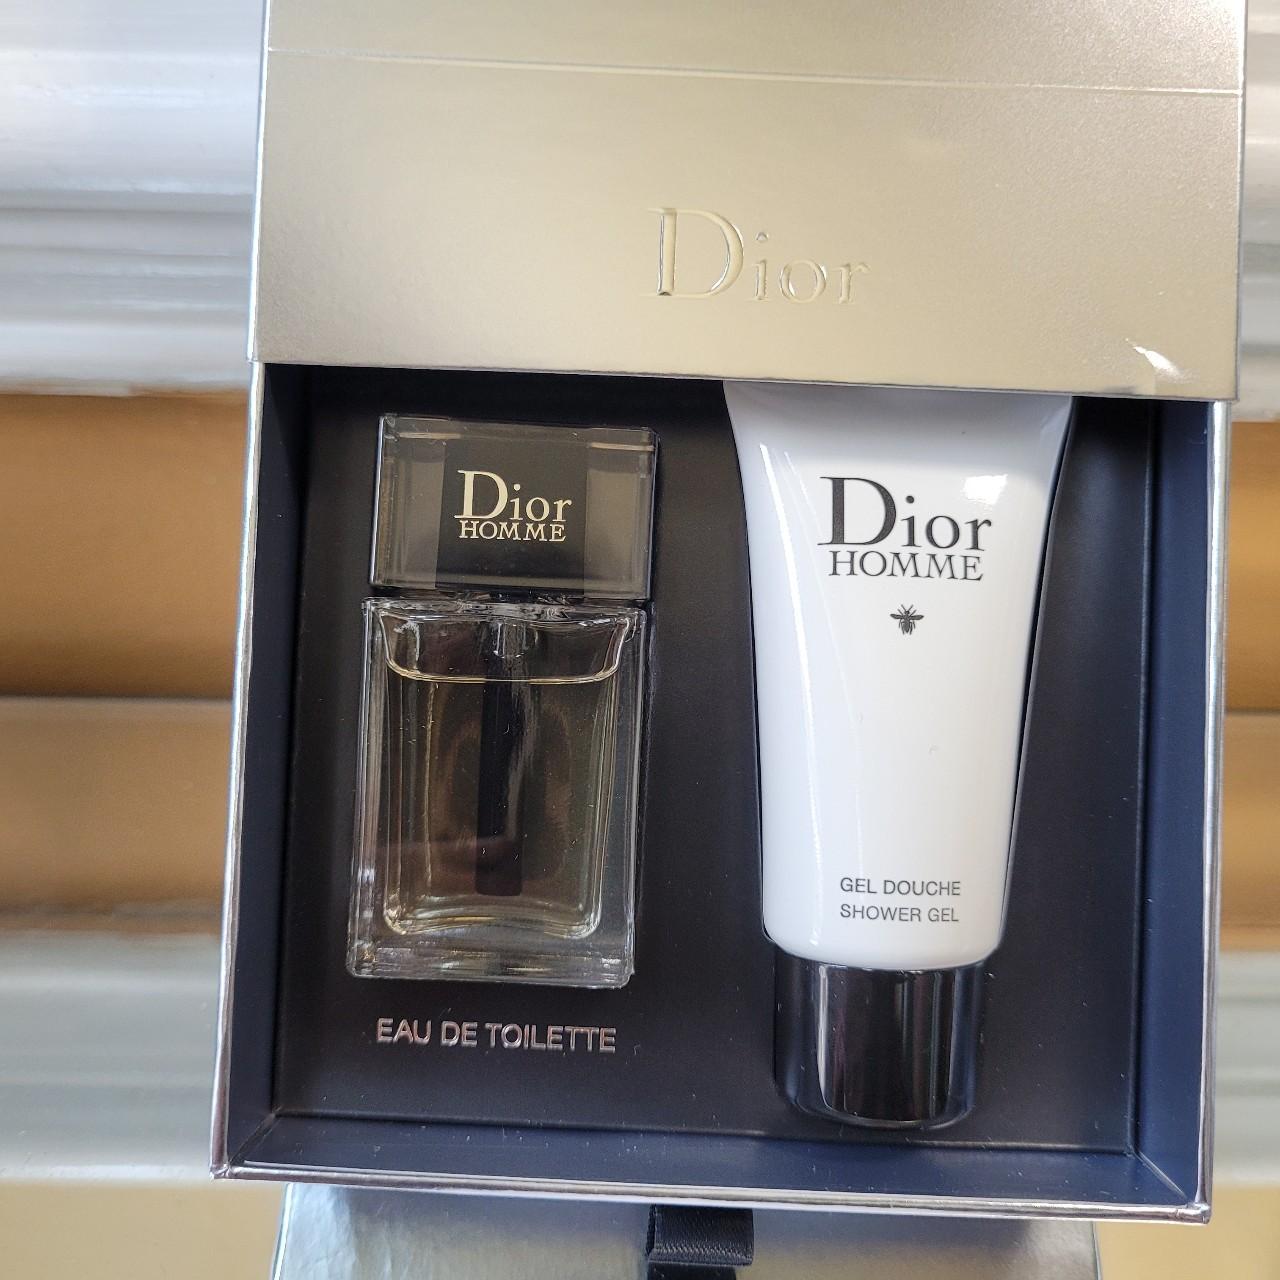 Product Image 2 - Dior homme gift set brand